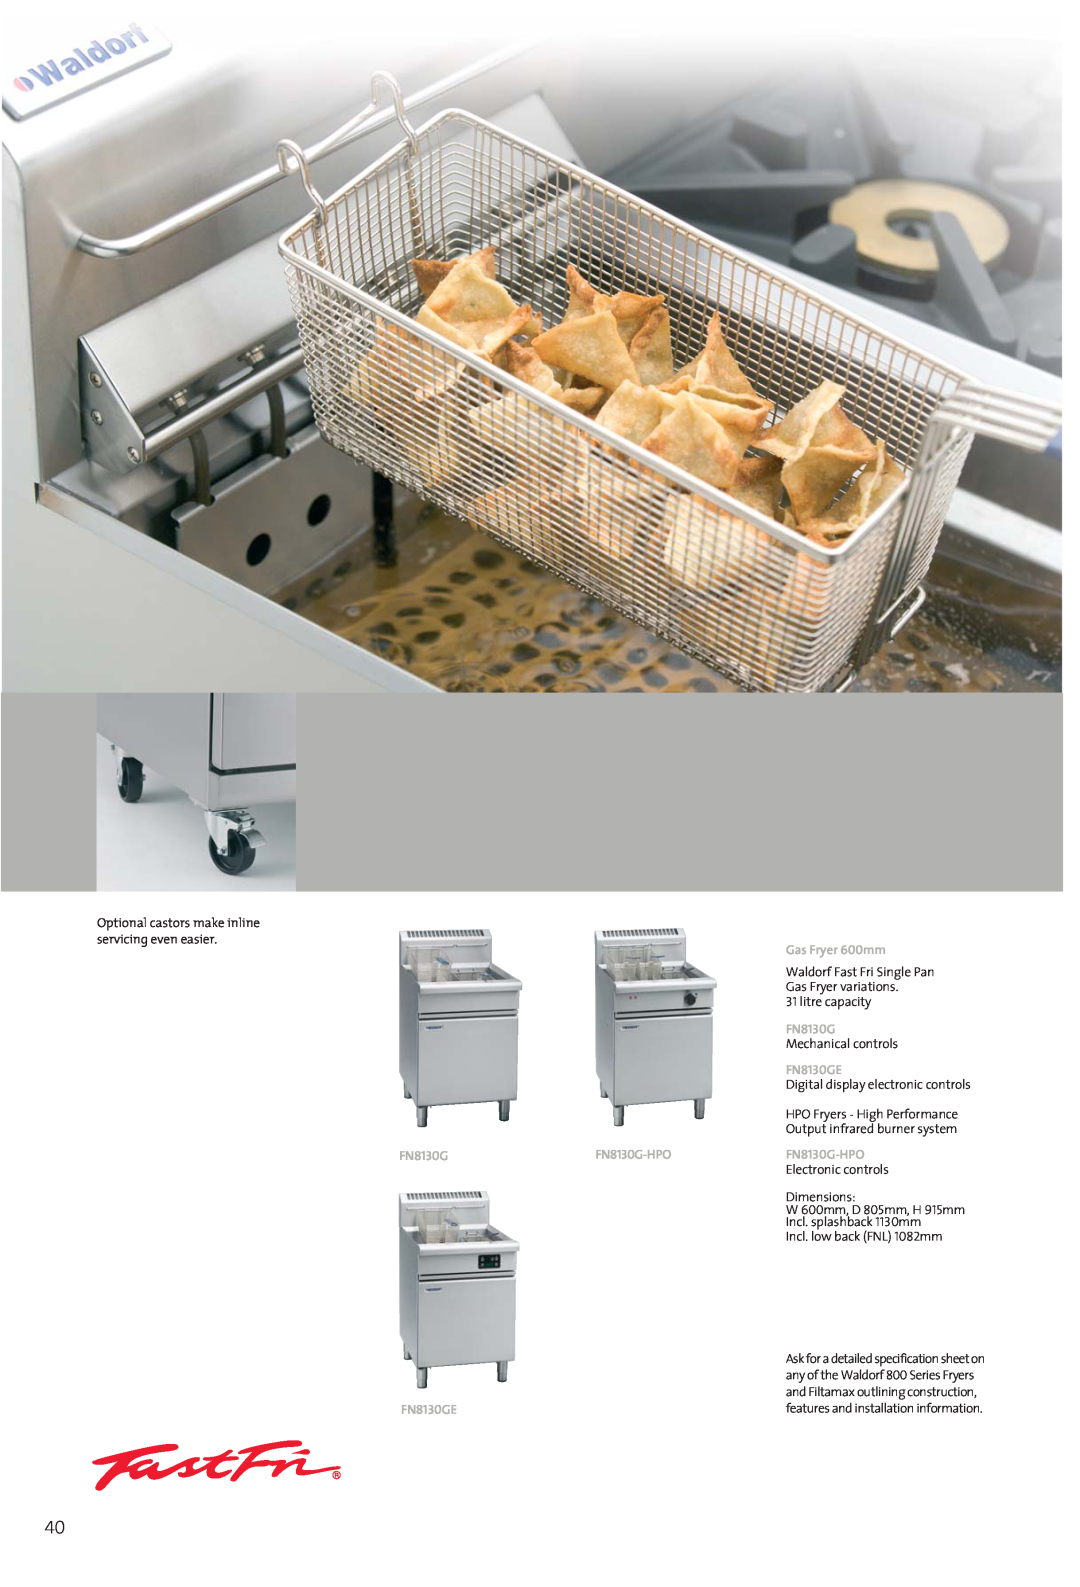 Moffat 800 manual Gas Fryer 600mm, Mechanical controls, FN8130GE, Output infrared burner system, FN8130G-HPO 